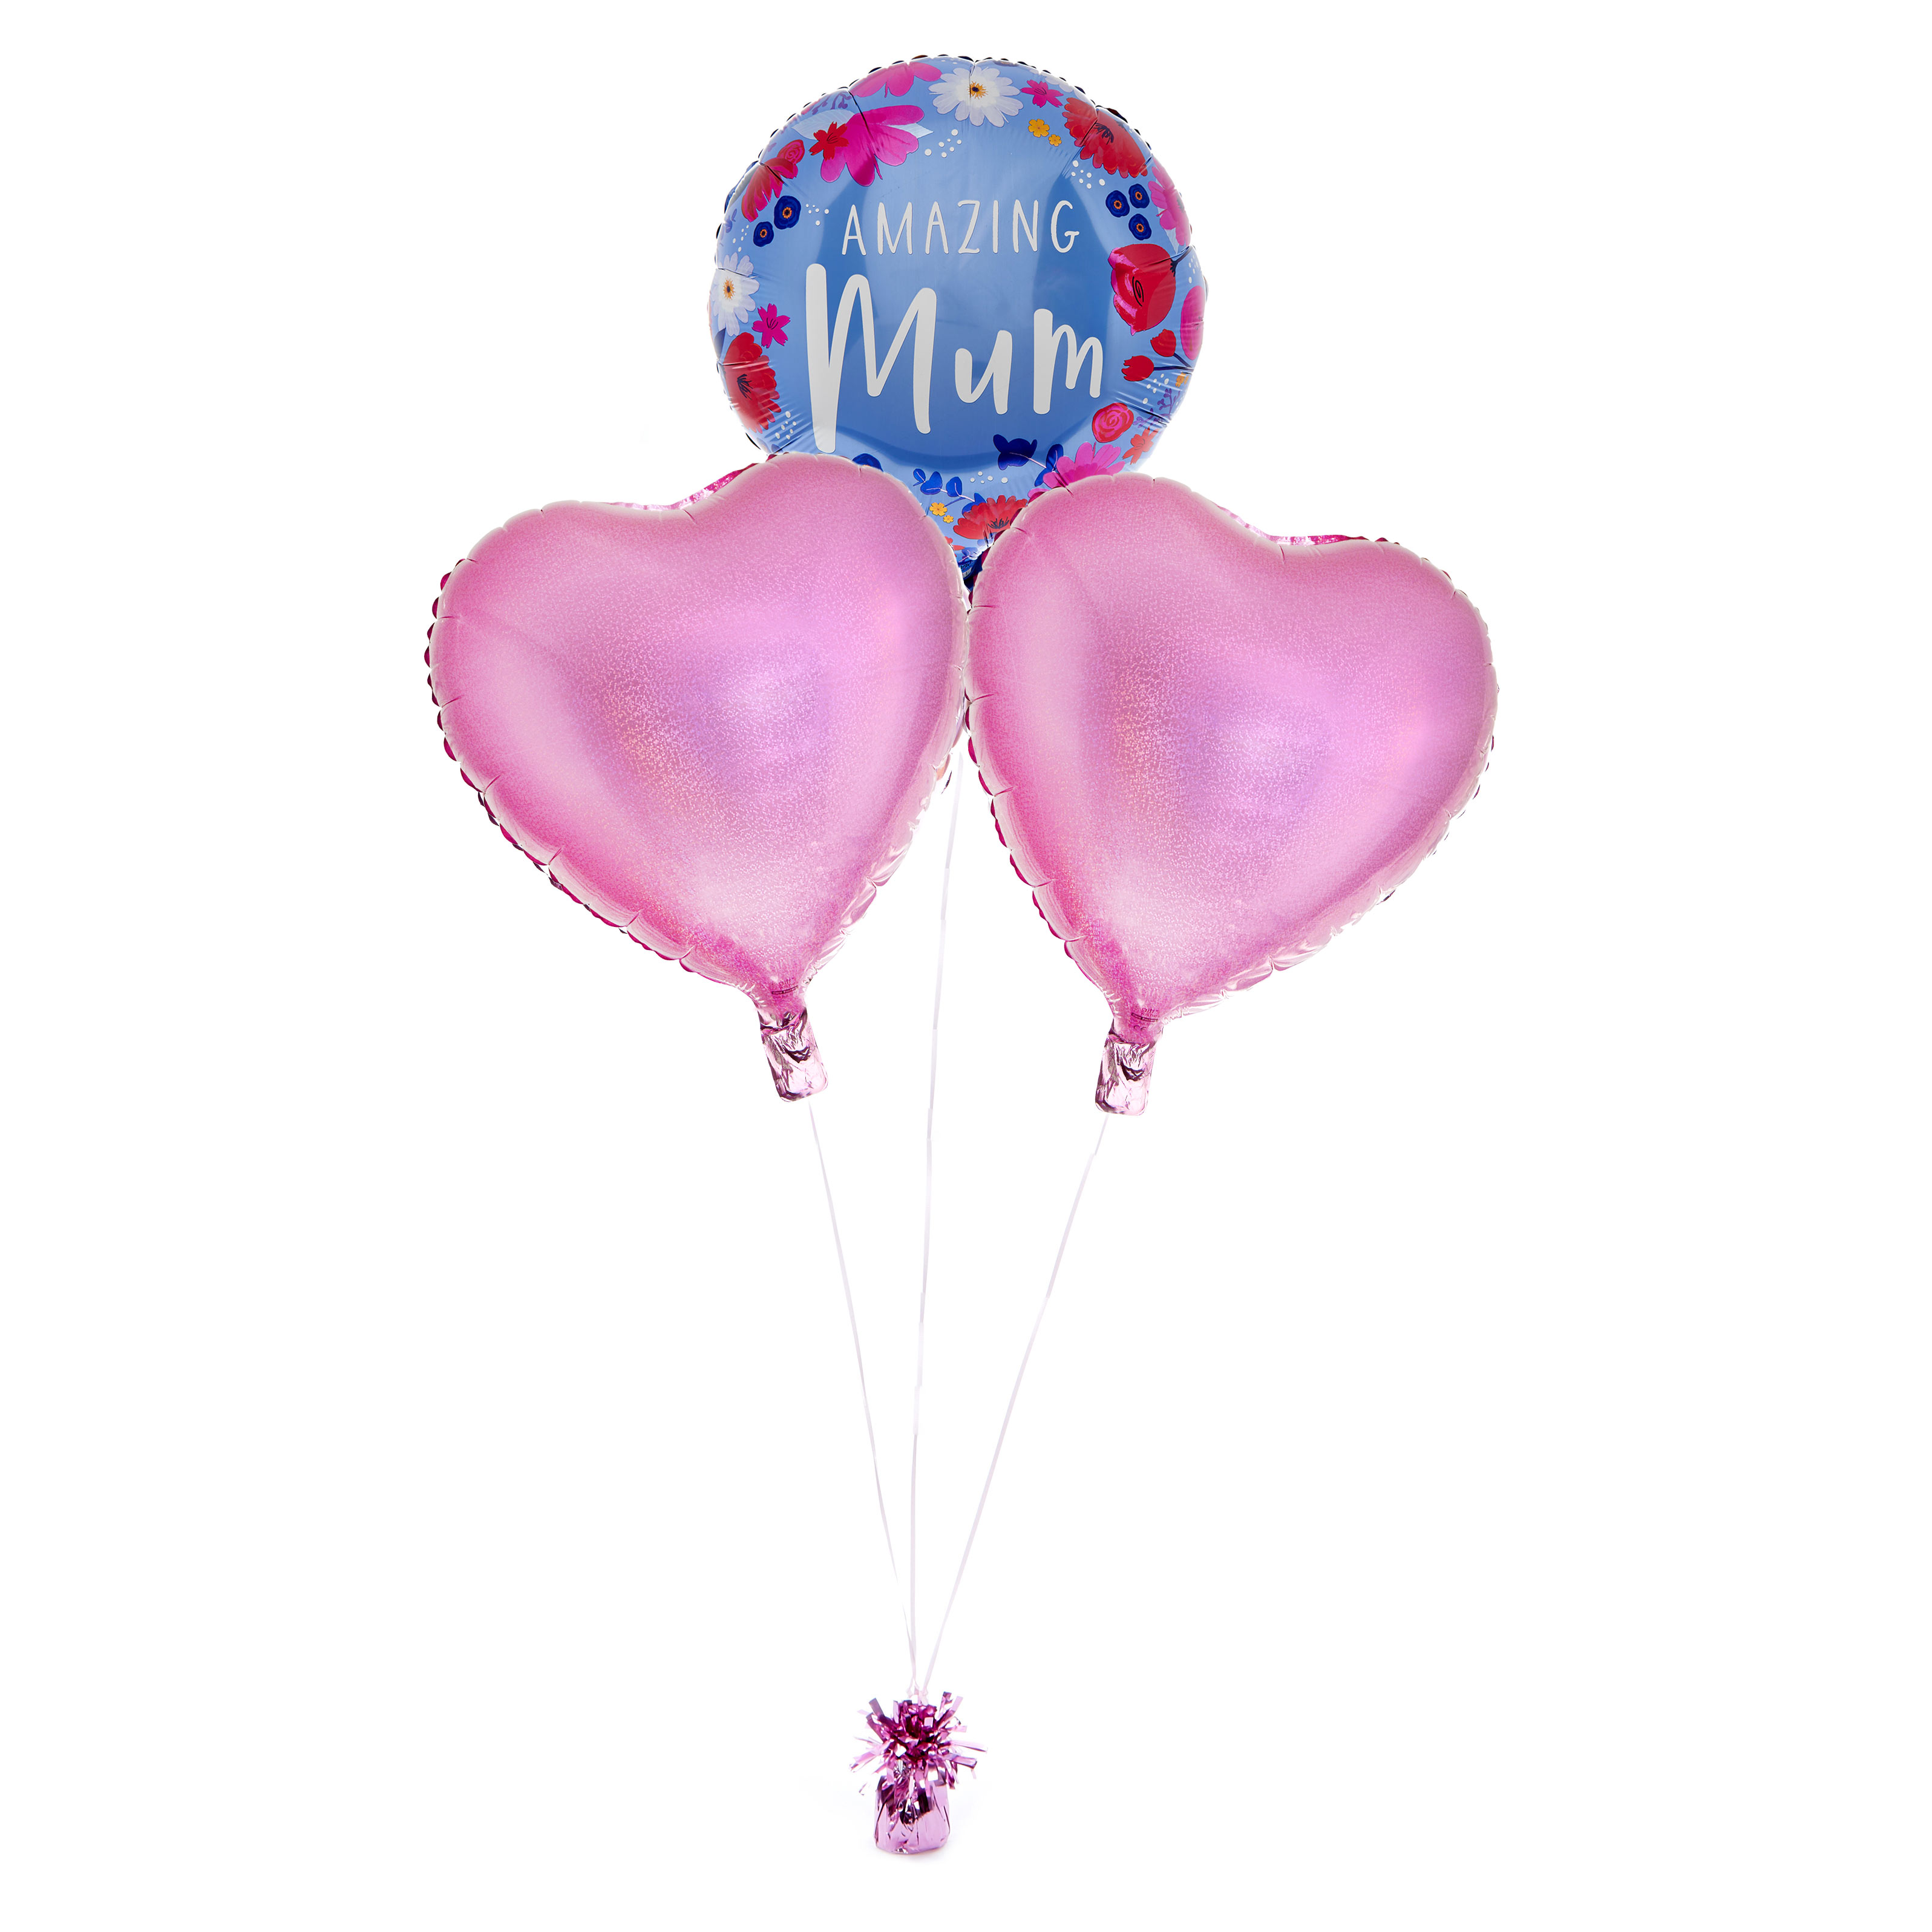 Amazing Mum Balloon Bouquet - Pre-Order For Mother's Day!